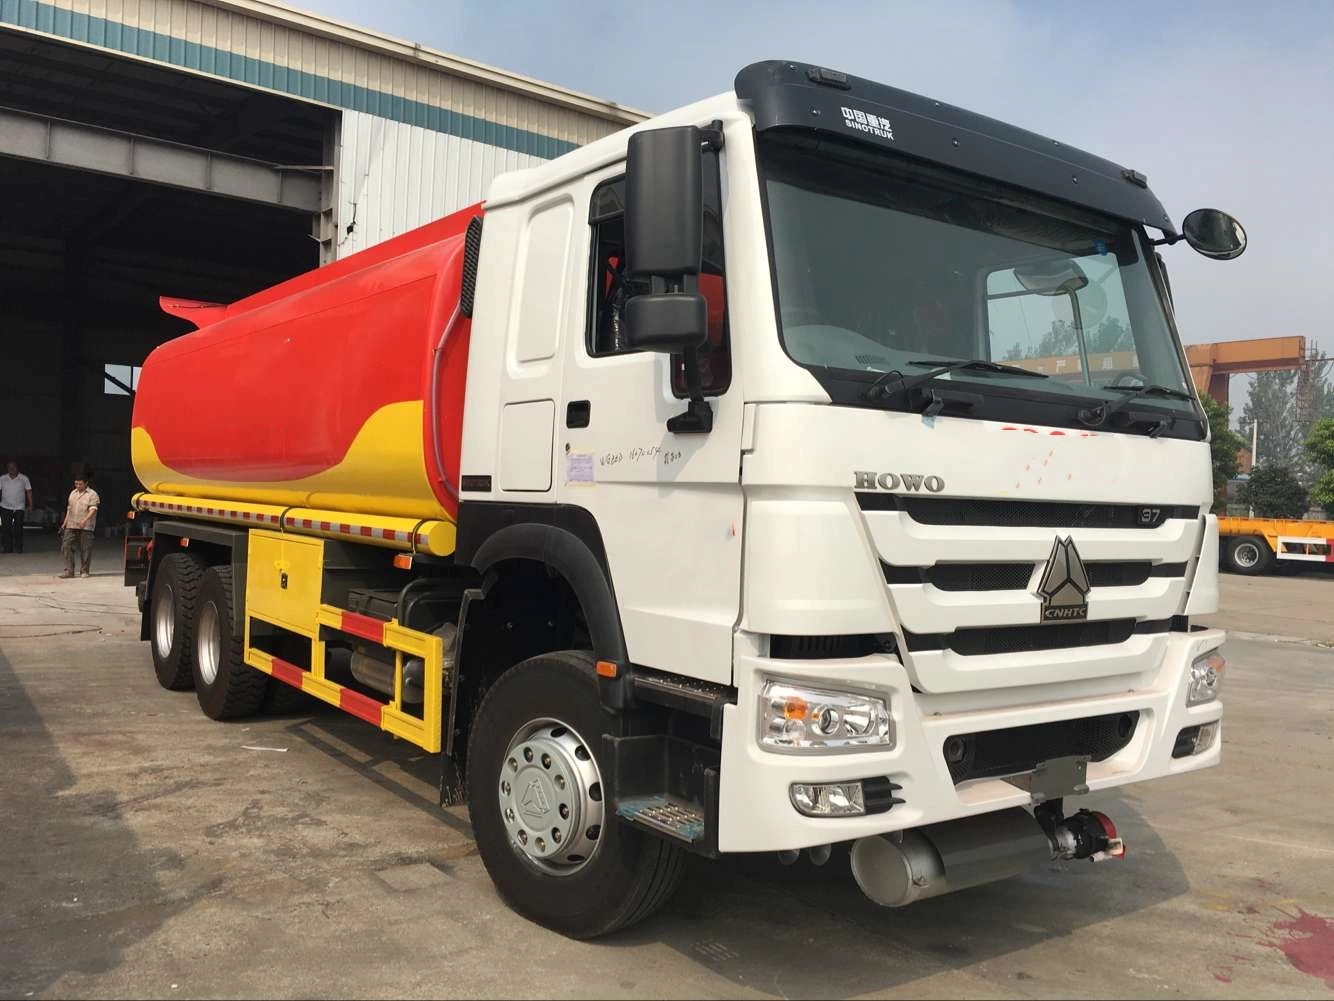 Chinese Top Brand Brand New Cheap Sinotruk HOWO 4X2 6X4 8X4 20000 Litres Fuel Oil Tanker Truck with Fuel Dispenser